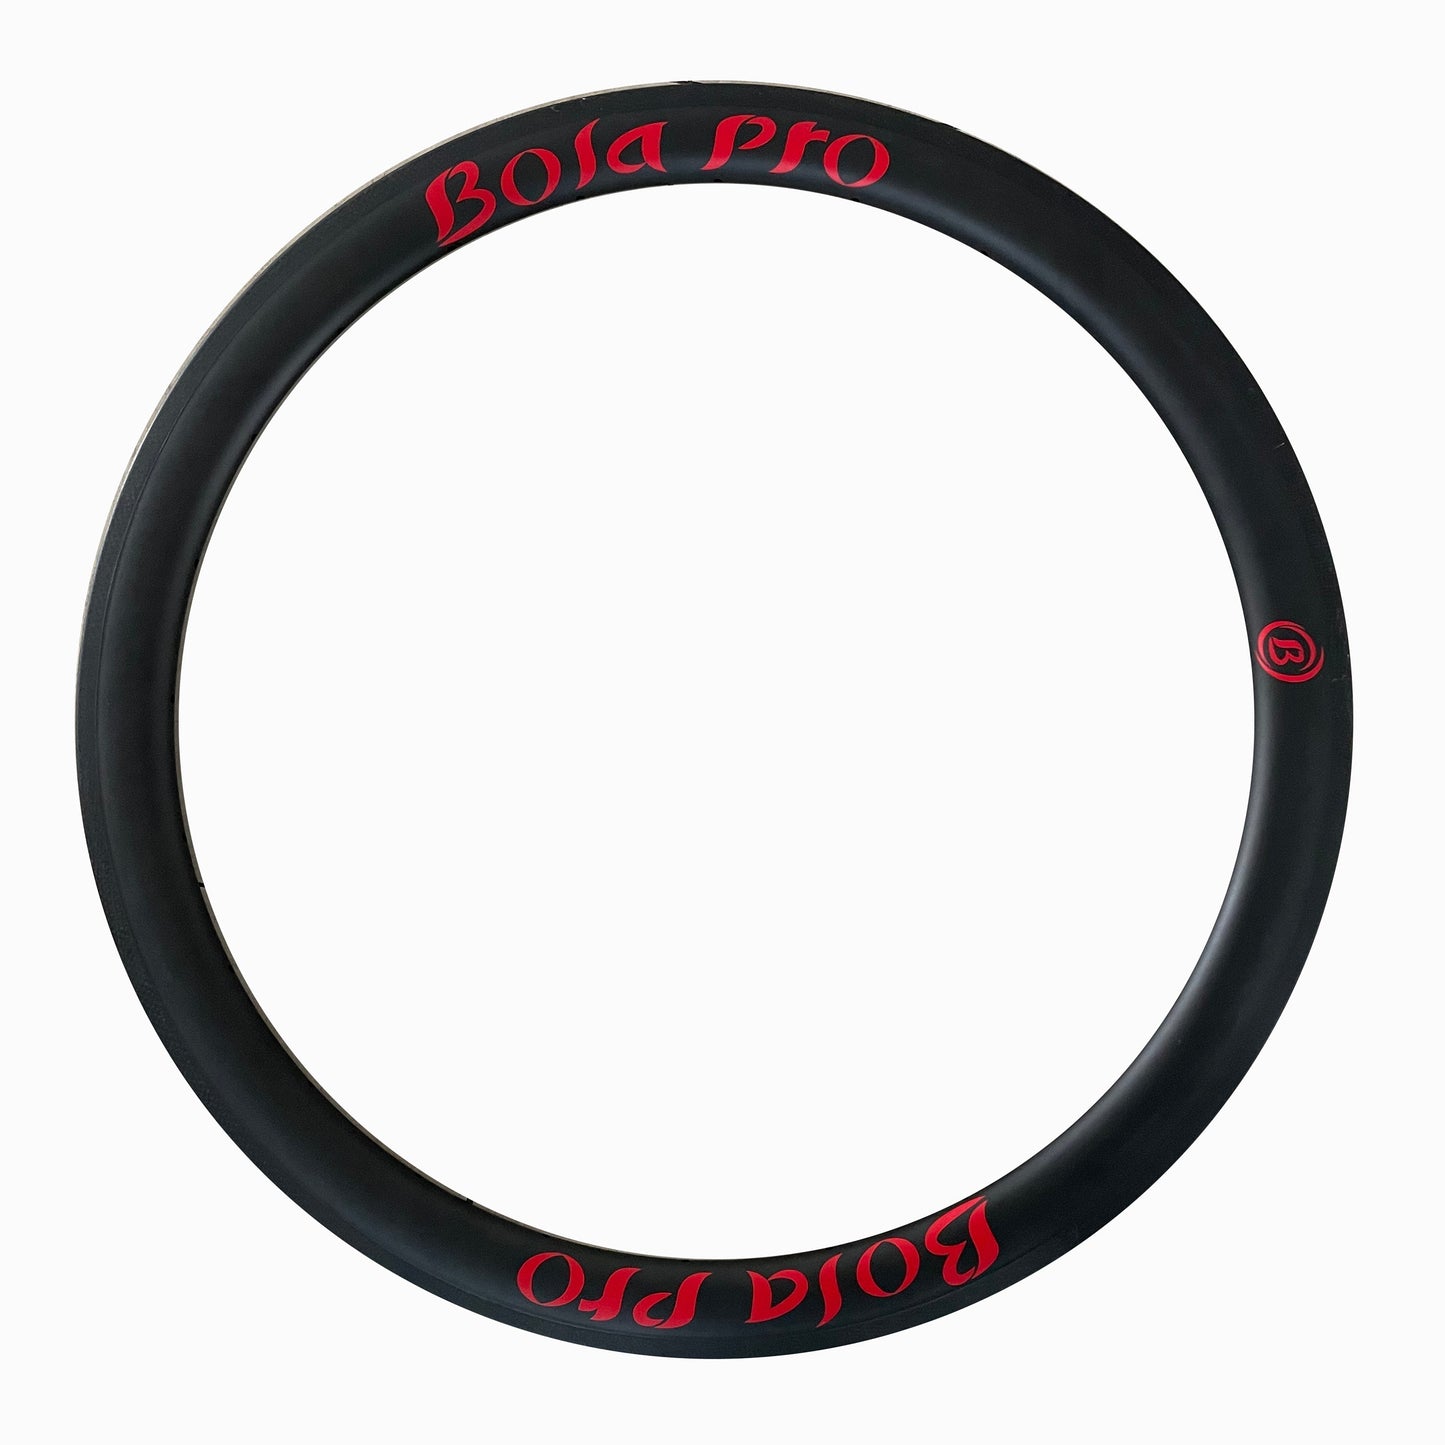 Tubeless ready ciclismo carbon route rim 65mm high  25mm wide 18mm inner wide